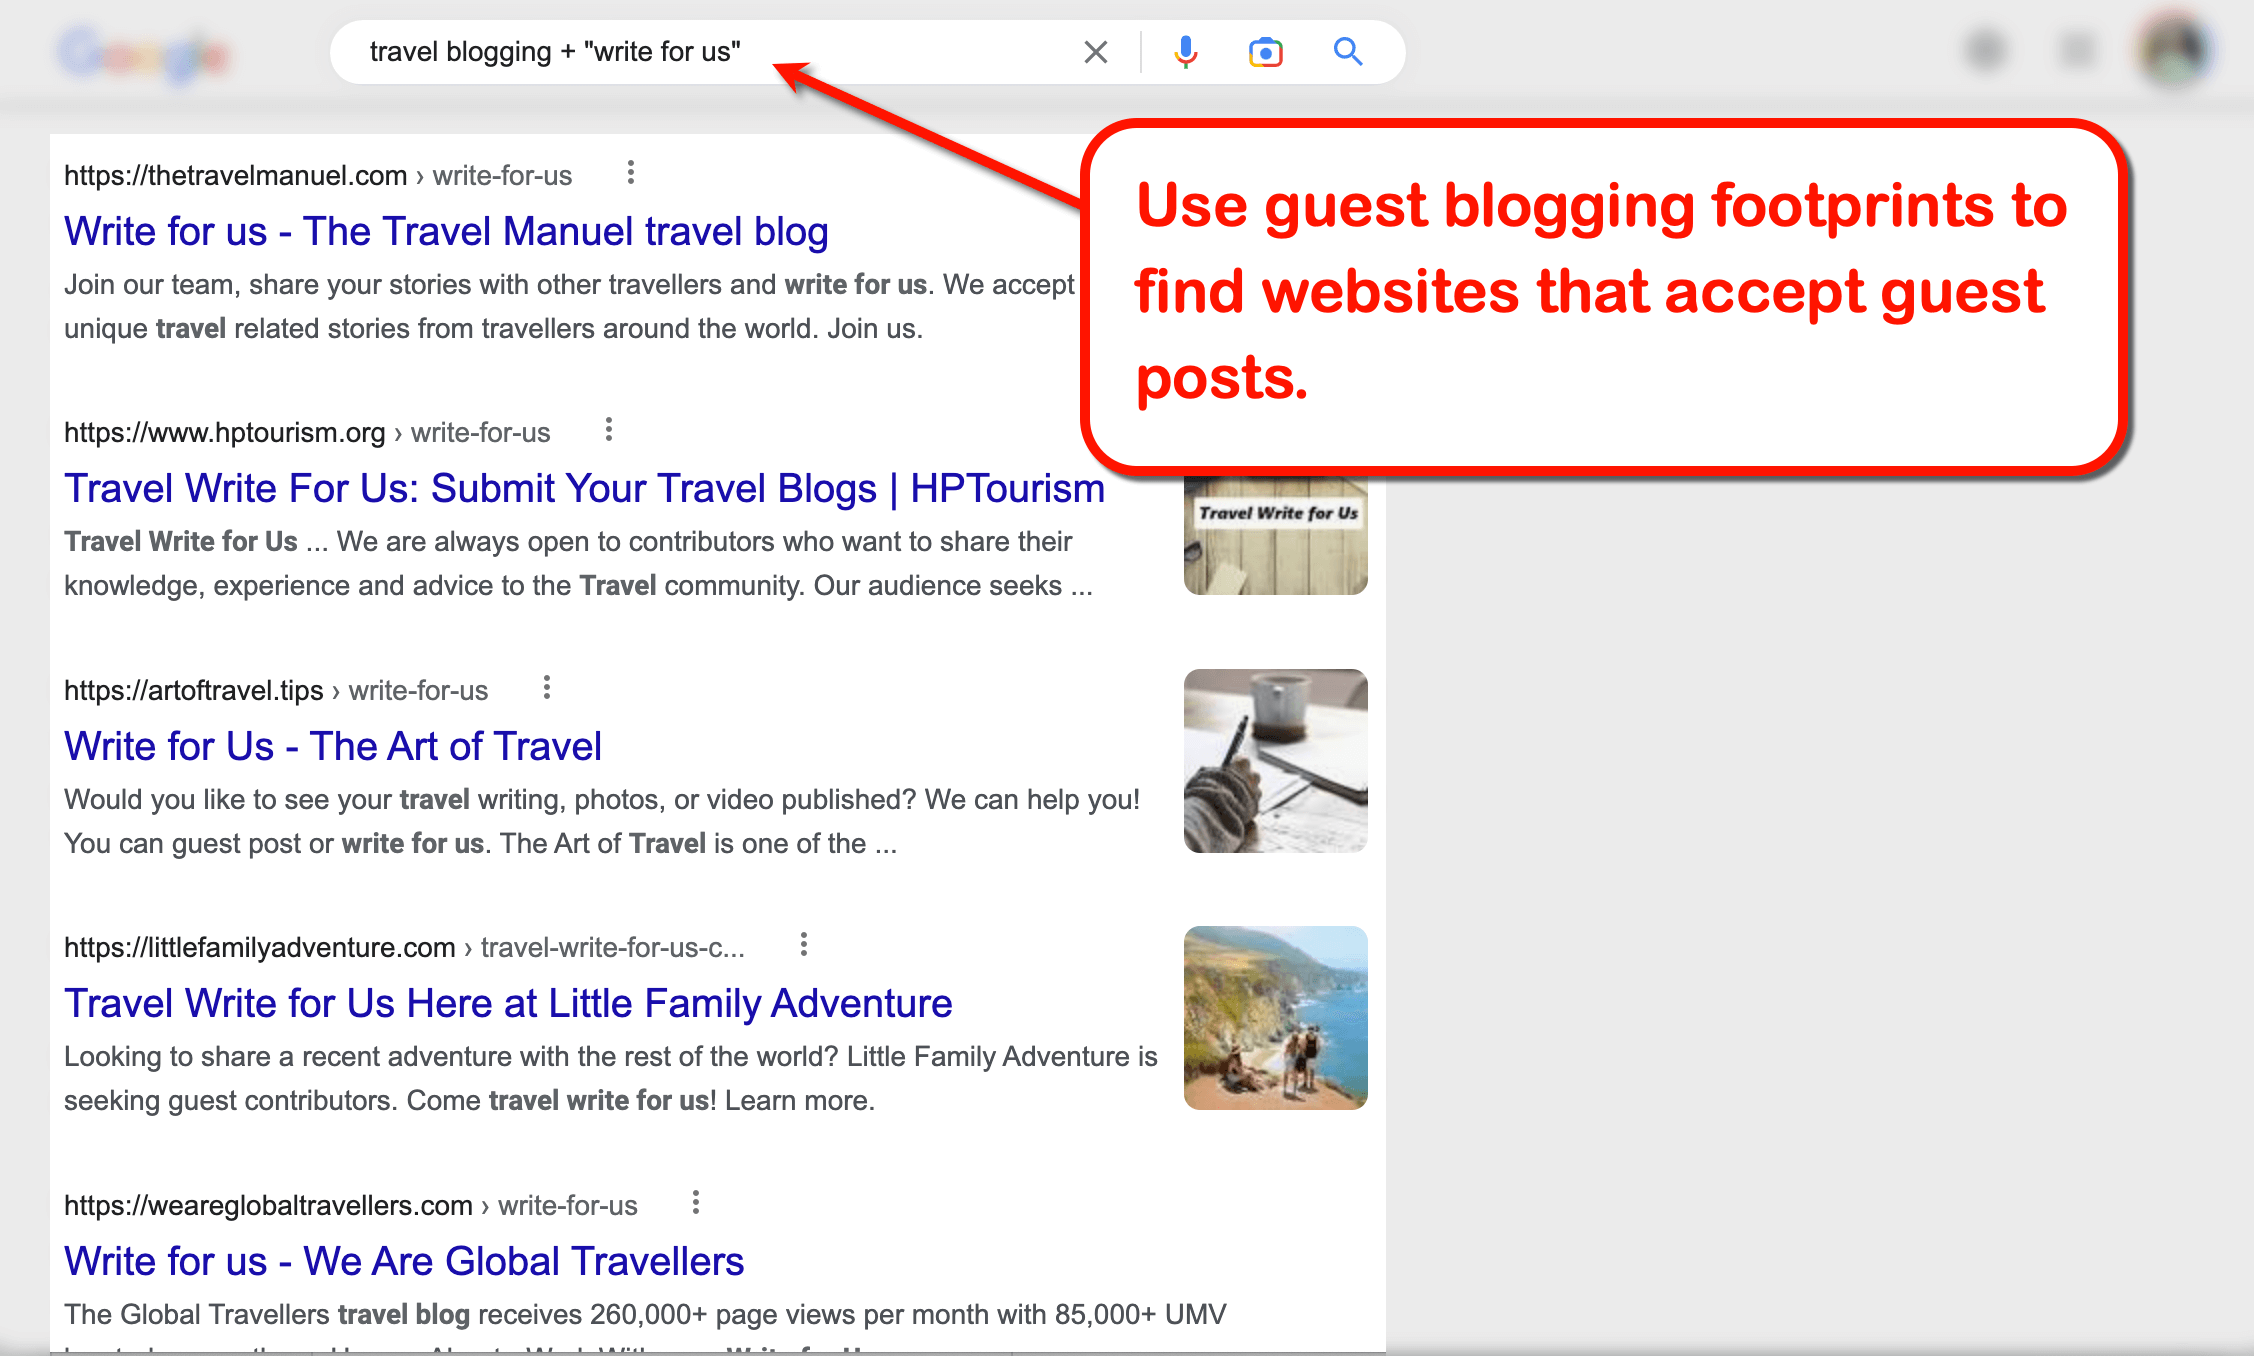 Sample Google search for guest blogging.